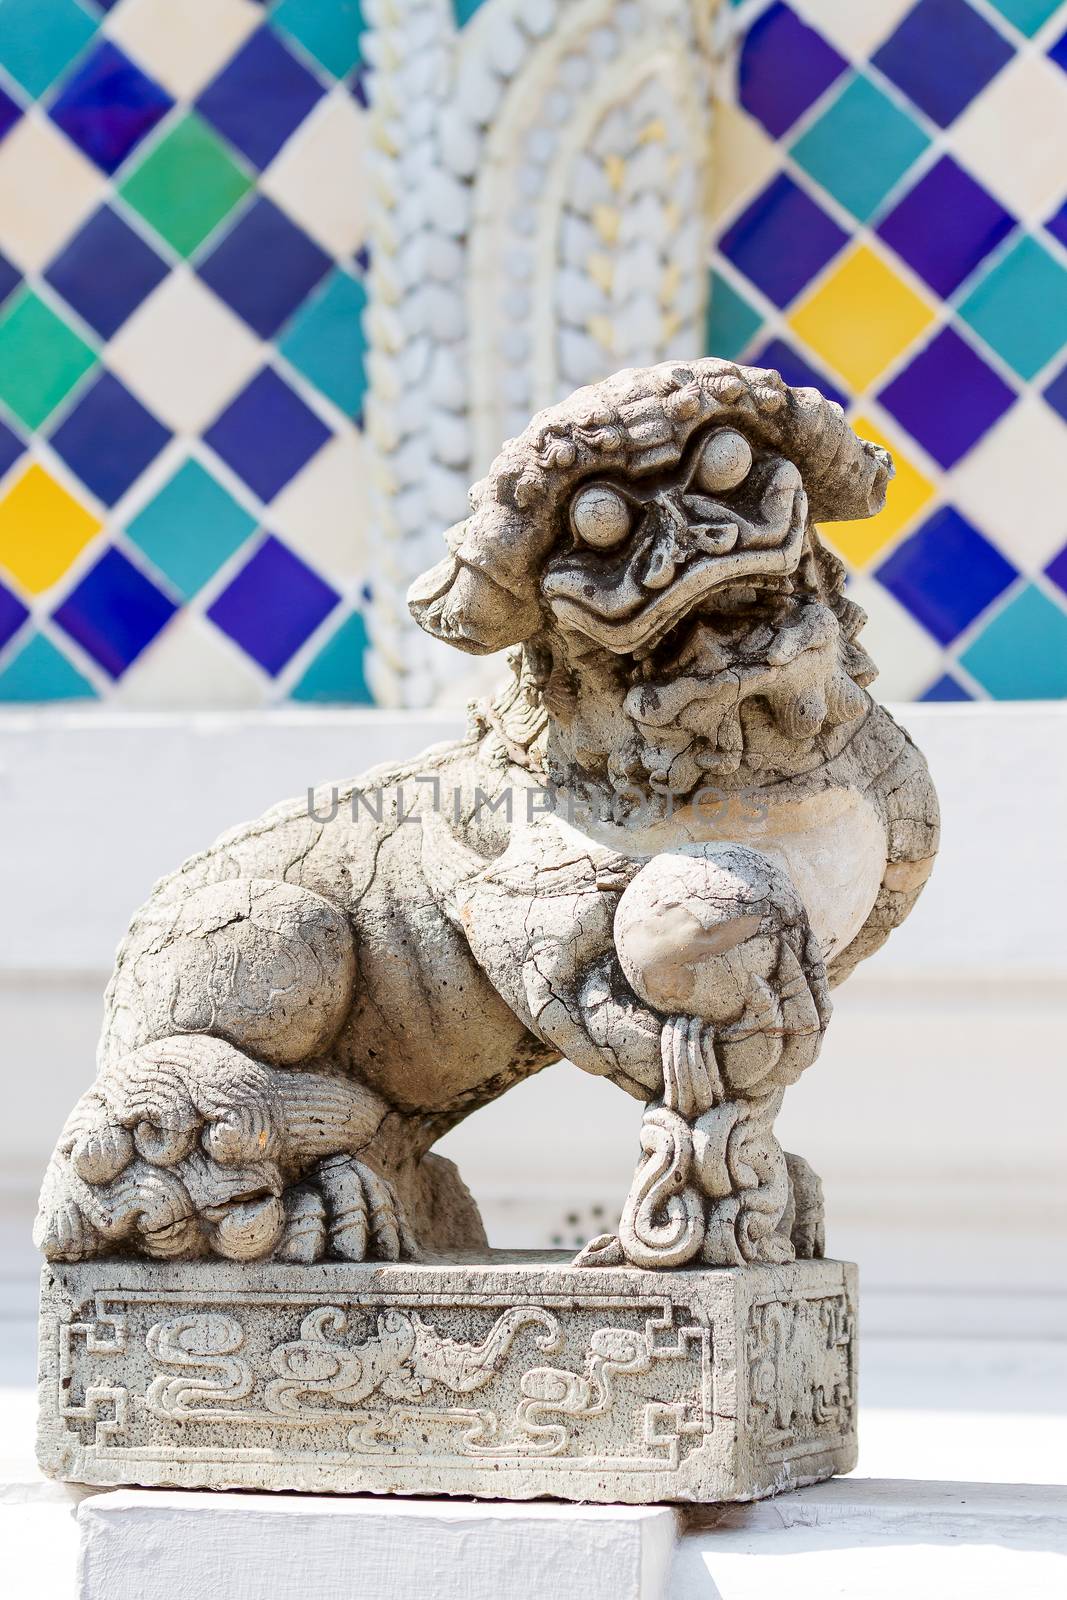 Buddhist sculpture. Chinese guardian lion statue in Royal Palace, Bangkok, Thailand.